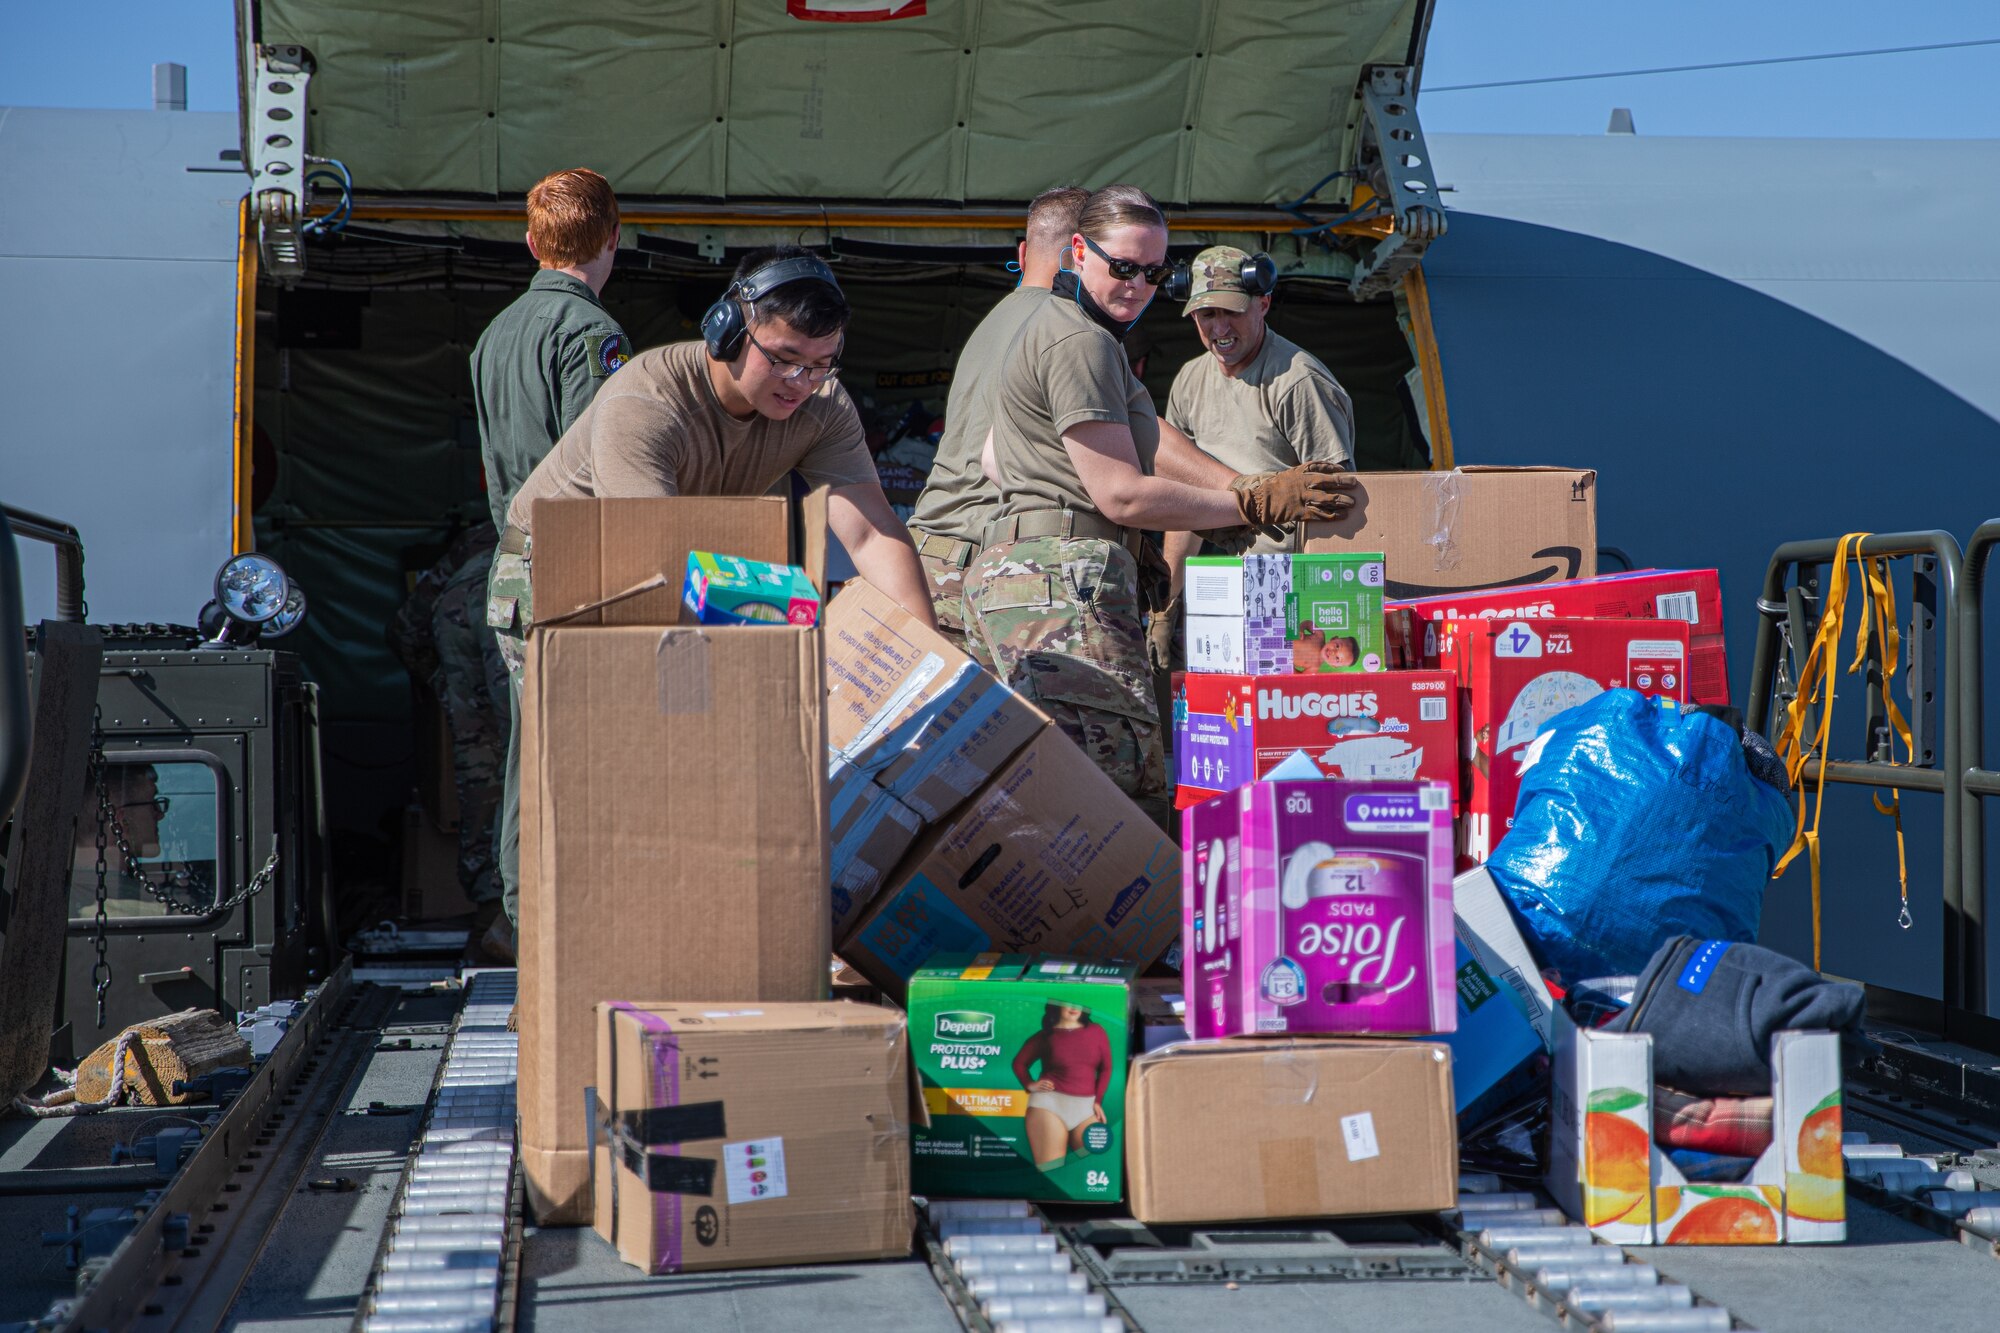 Airmen from Fairchild Air Force Base, Washington, unload donations off a KC-135 Stratotanker in support of Operation Allies Welcome on Holloman Air Force Base, New Mexico, Sept. 17, 2021. The Department of Defense, through U.S. Northern Command, and in support of the Department of State and Department of Homeland Security, is providing transportation, temporary housing, medical screening, and general support for at least 50,000 Afghan evacuees at suitable facilities, in permanent or temporary structures, as quickly as possible. This initiative provides Afghan evacuees essential support at secure locations outside Afghanistan. (U.S. Army photo by Pfc. Anthony Sanchez)